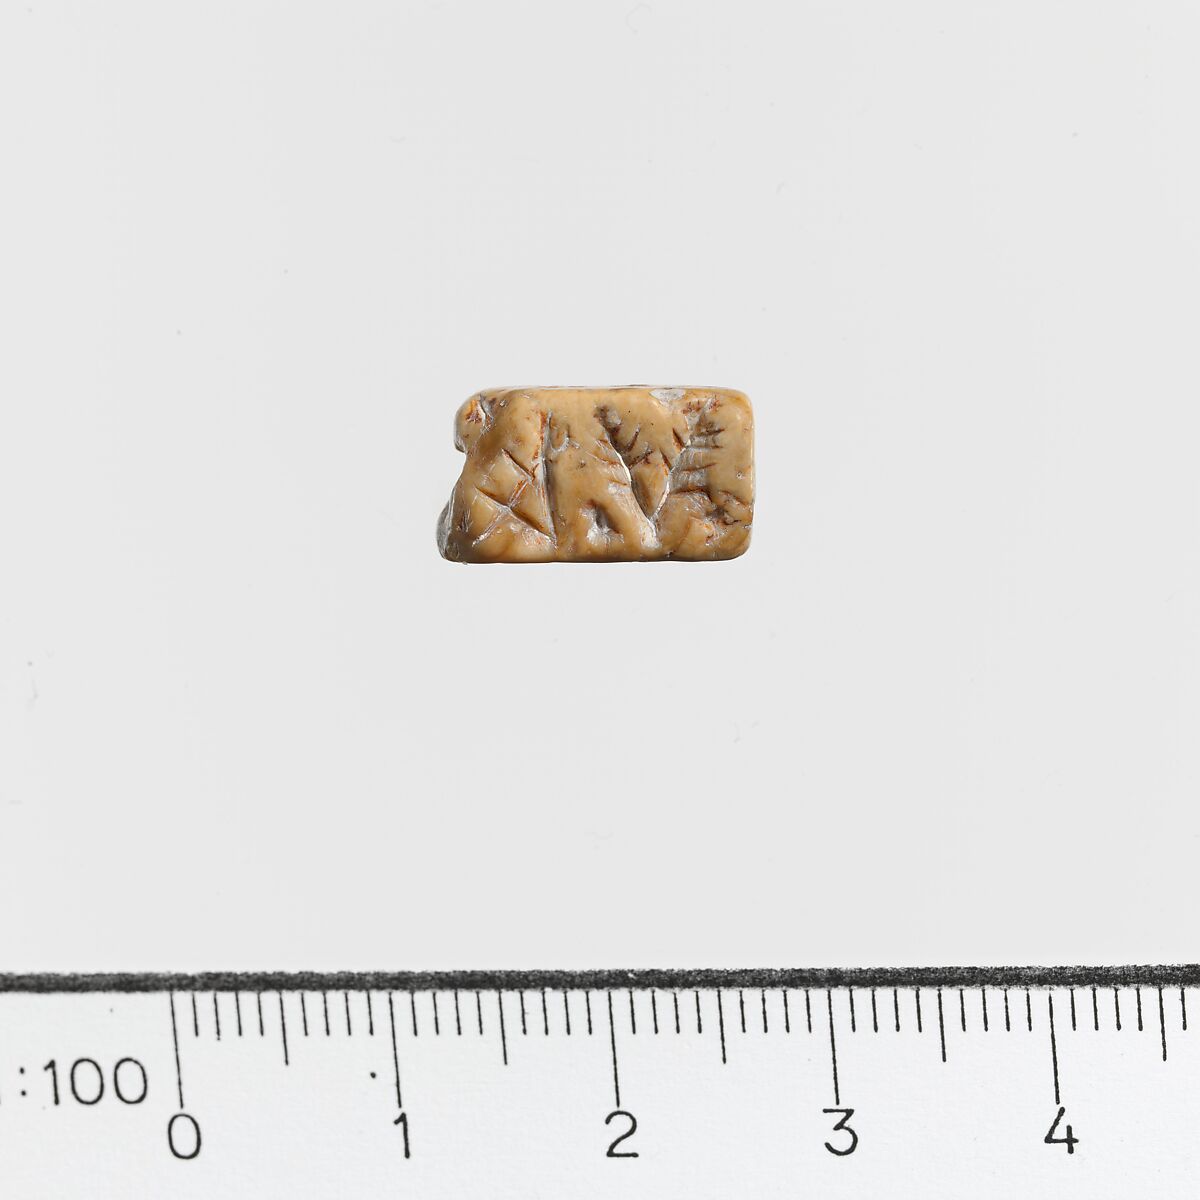 Seal with hole, Steatite, Minoan 